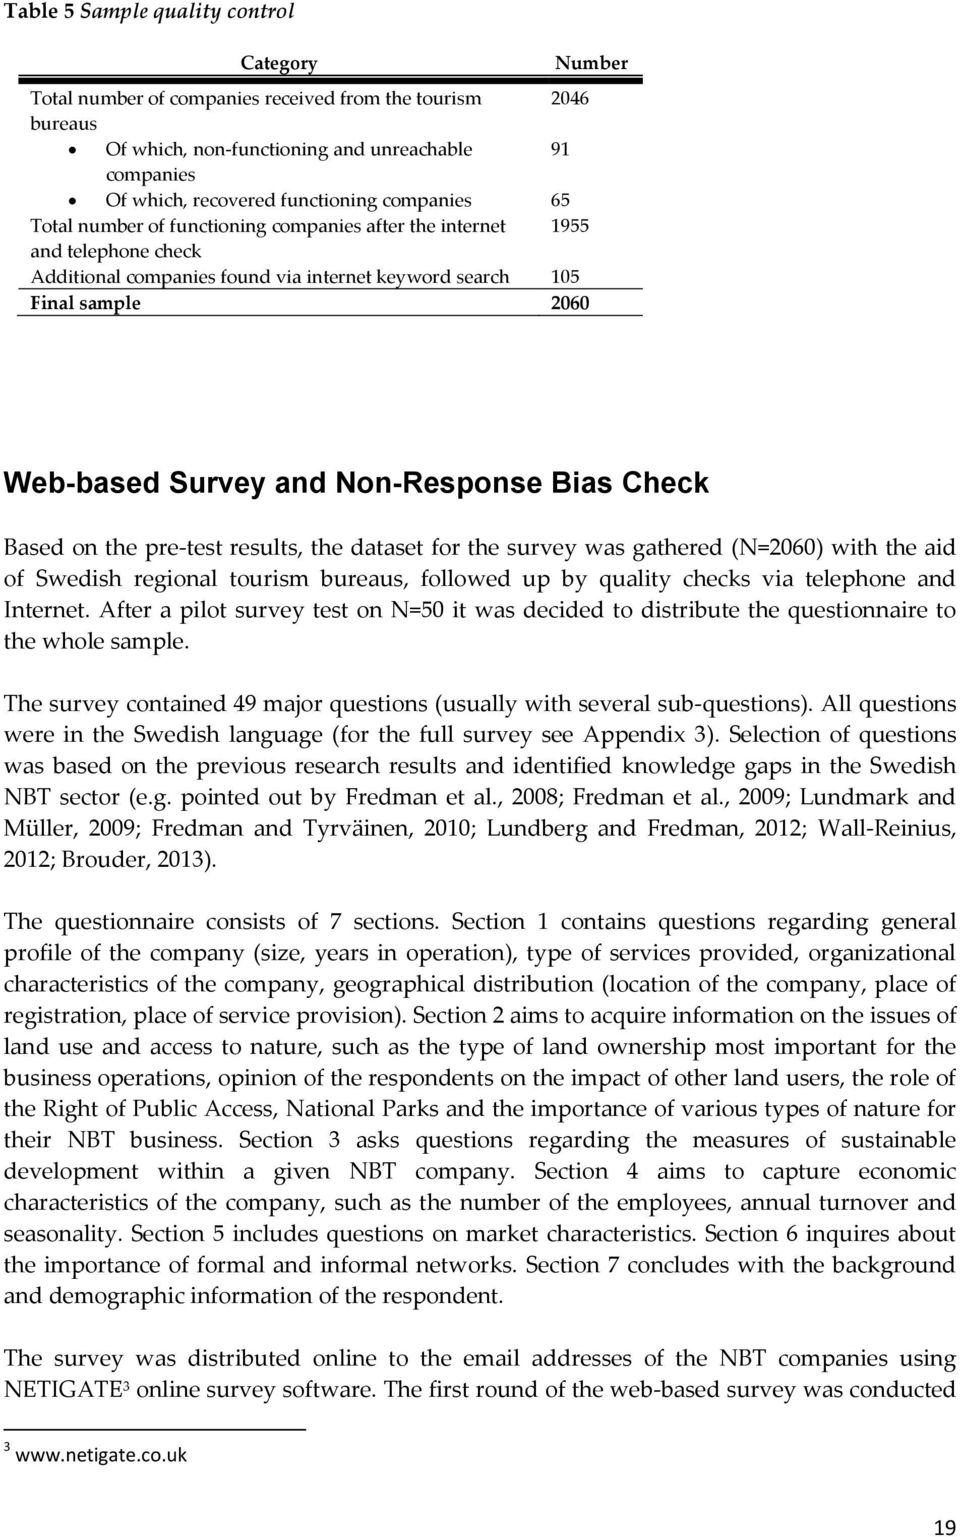 Non-Response Bias Check Based on the pre-test results, the dataset for the survey was gathered (N=2060) with the aid of Swedish regional tourism bureaus, followed up by quality checks via telephone